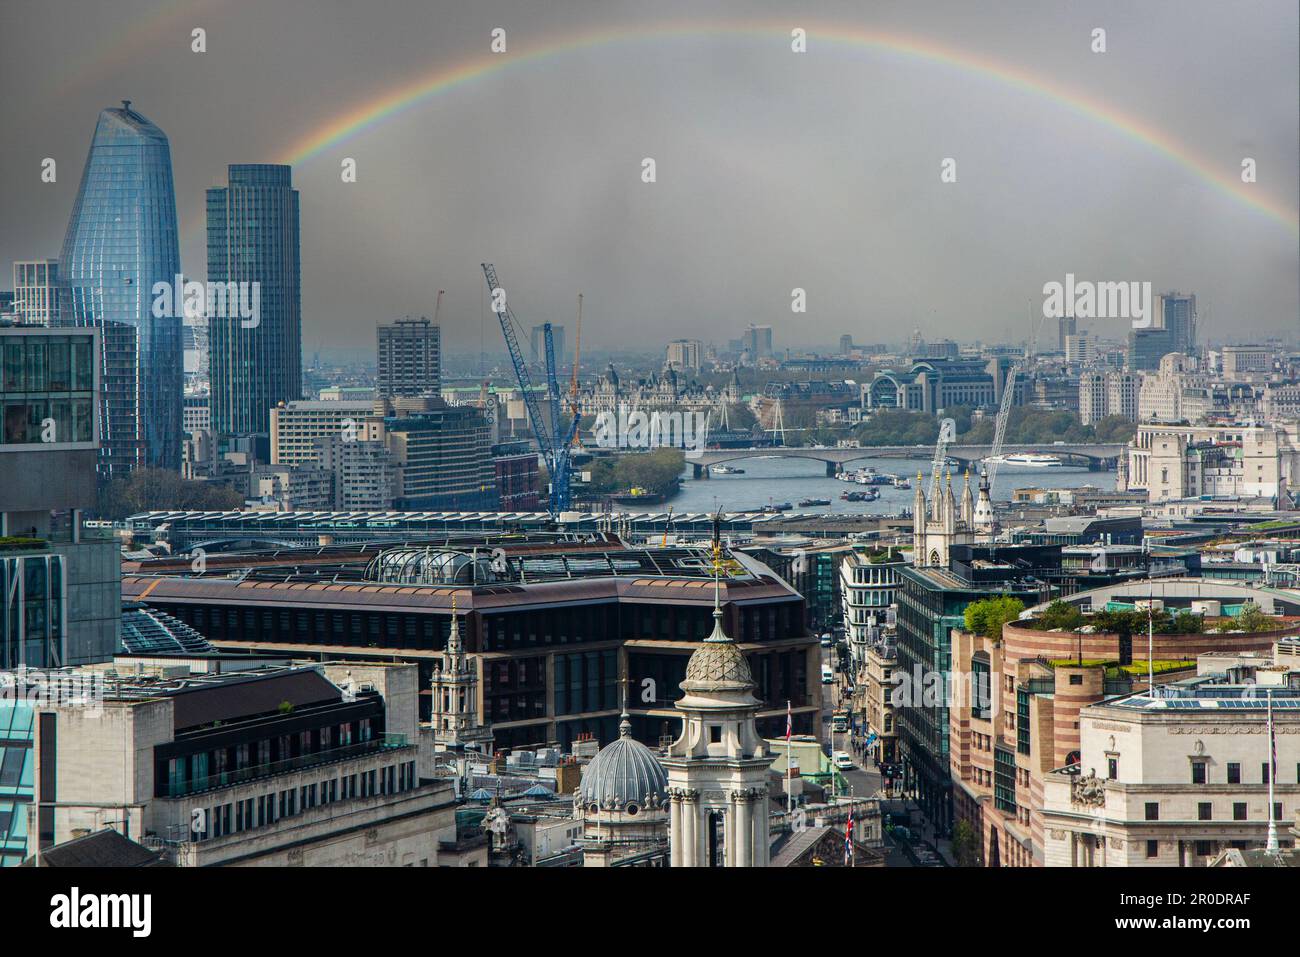 A double rainbow over the City of London and River Thames Stock Photo